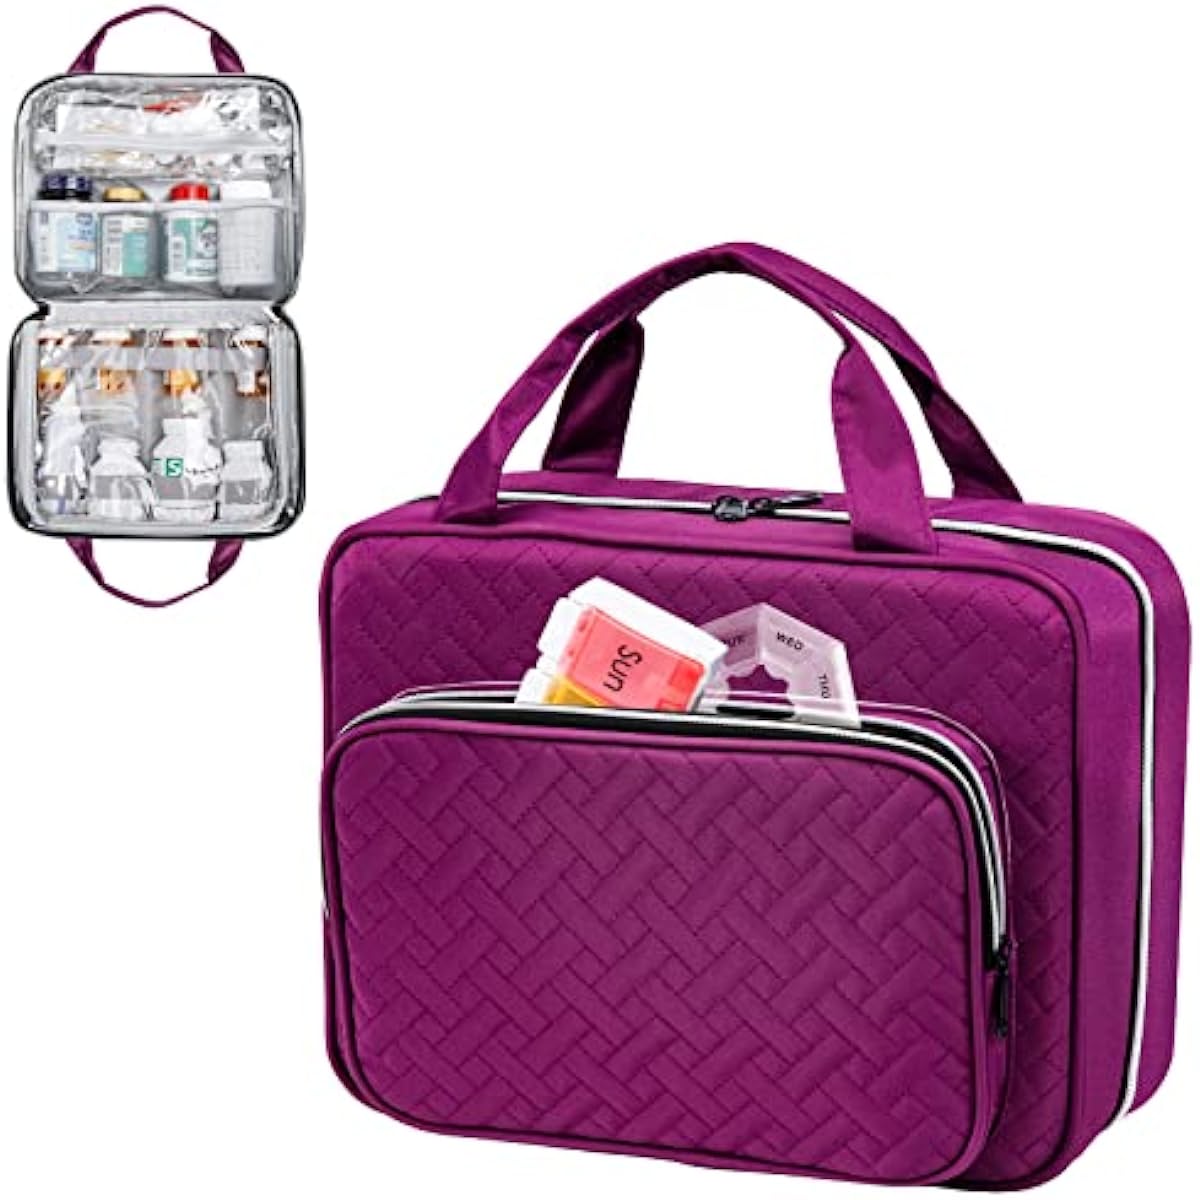 Medicine Bag for Traveling, Pill Bottle Organizer and Storage, Home Medication Bag, Vitamin Bottle Carrying Case Purple (Giveaway Weekly Pill Organizer)